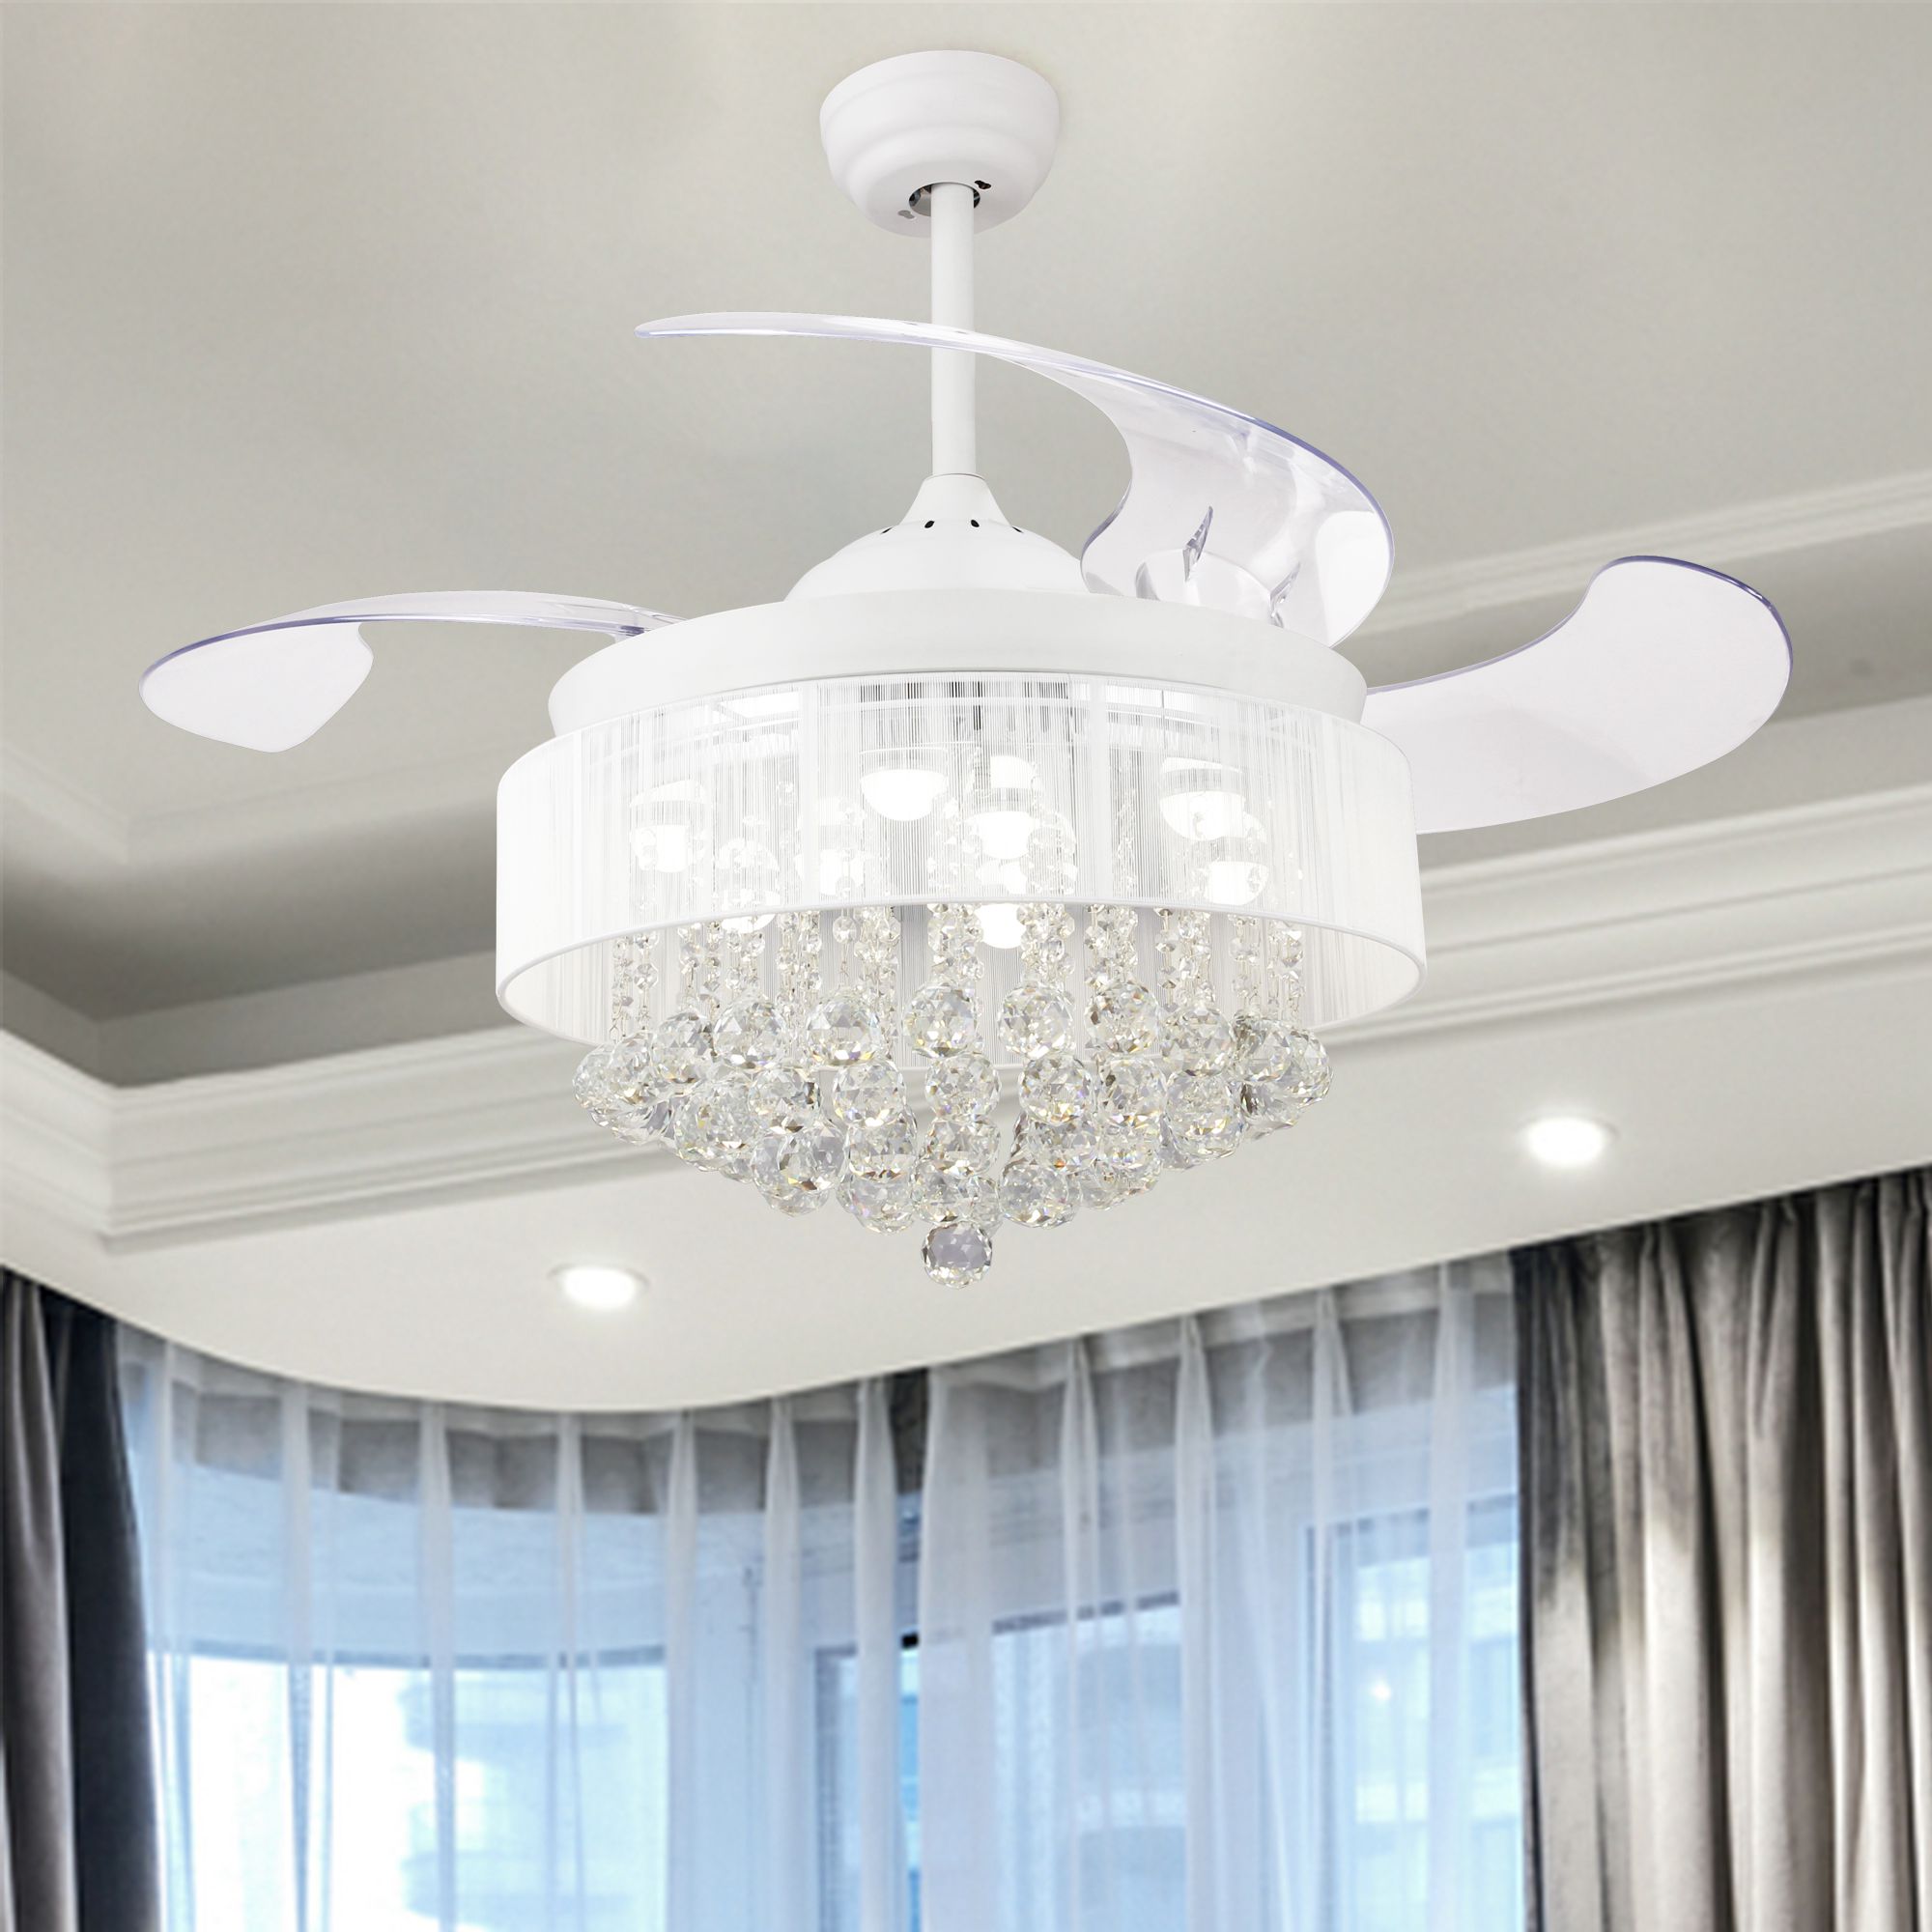 Parrot Uncle 46-in White LED Indoor Chandelier Ceiling Fan with Light ...